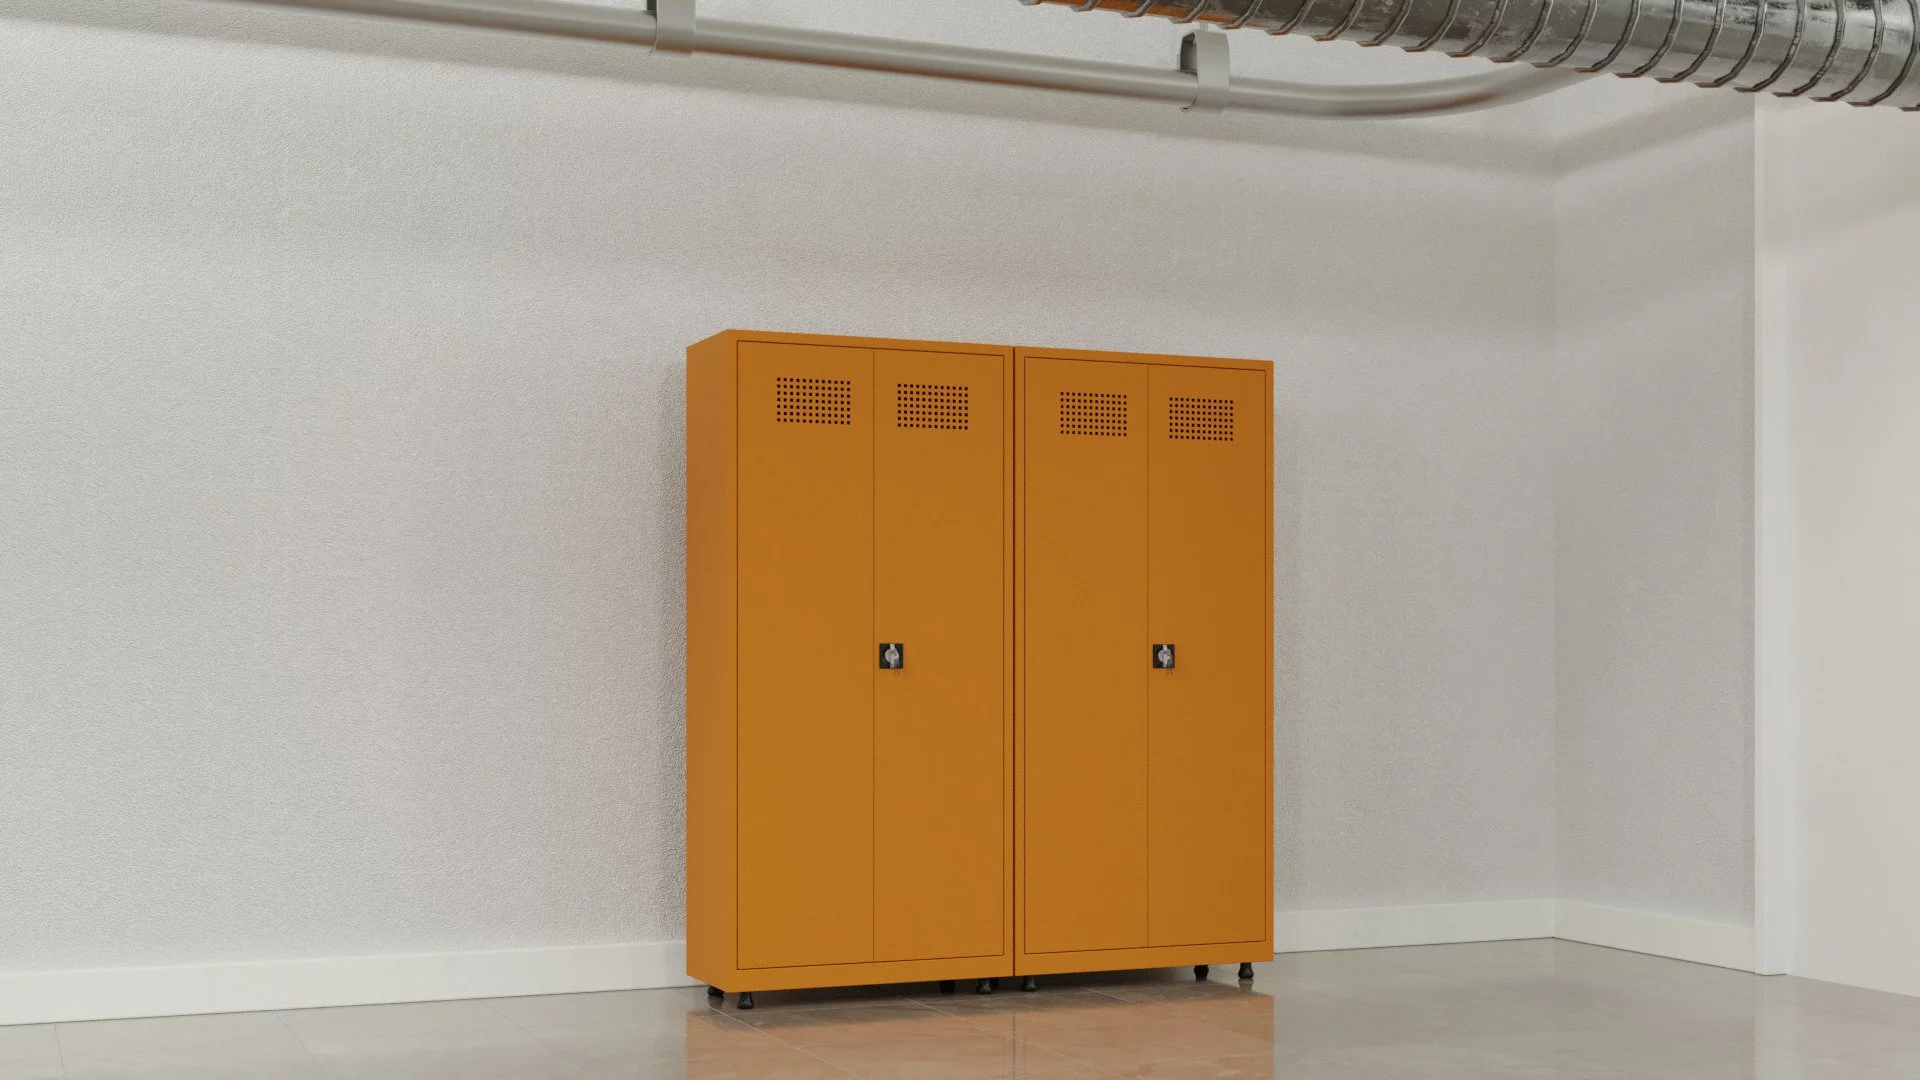 view of chemical substances storage cabinet with 4 shelves